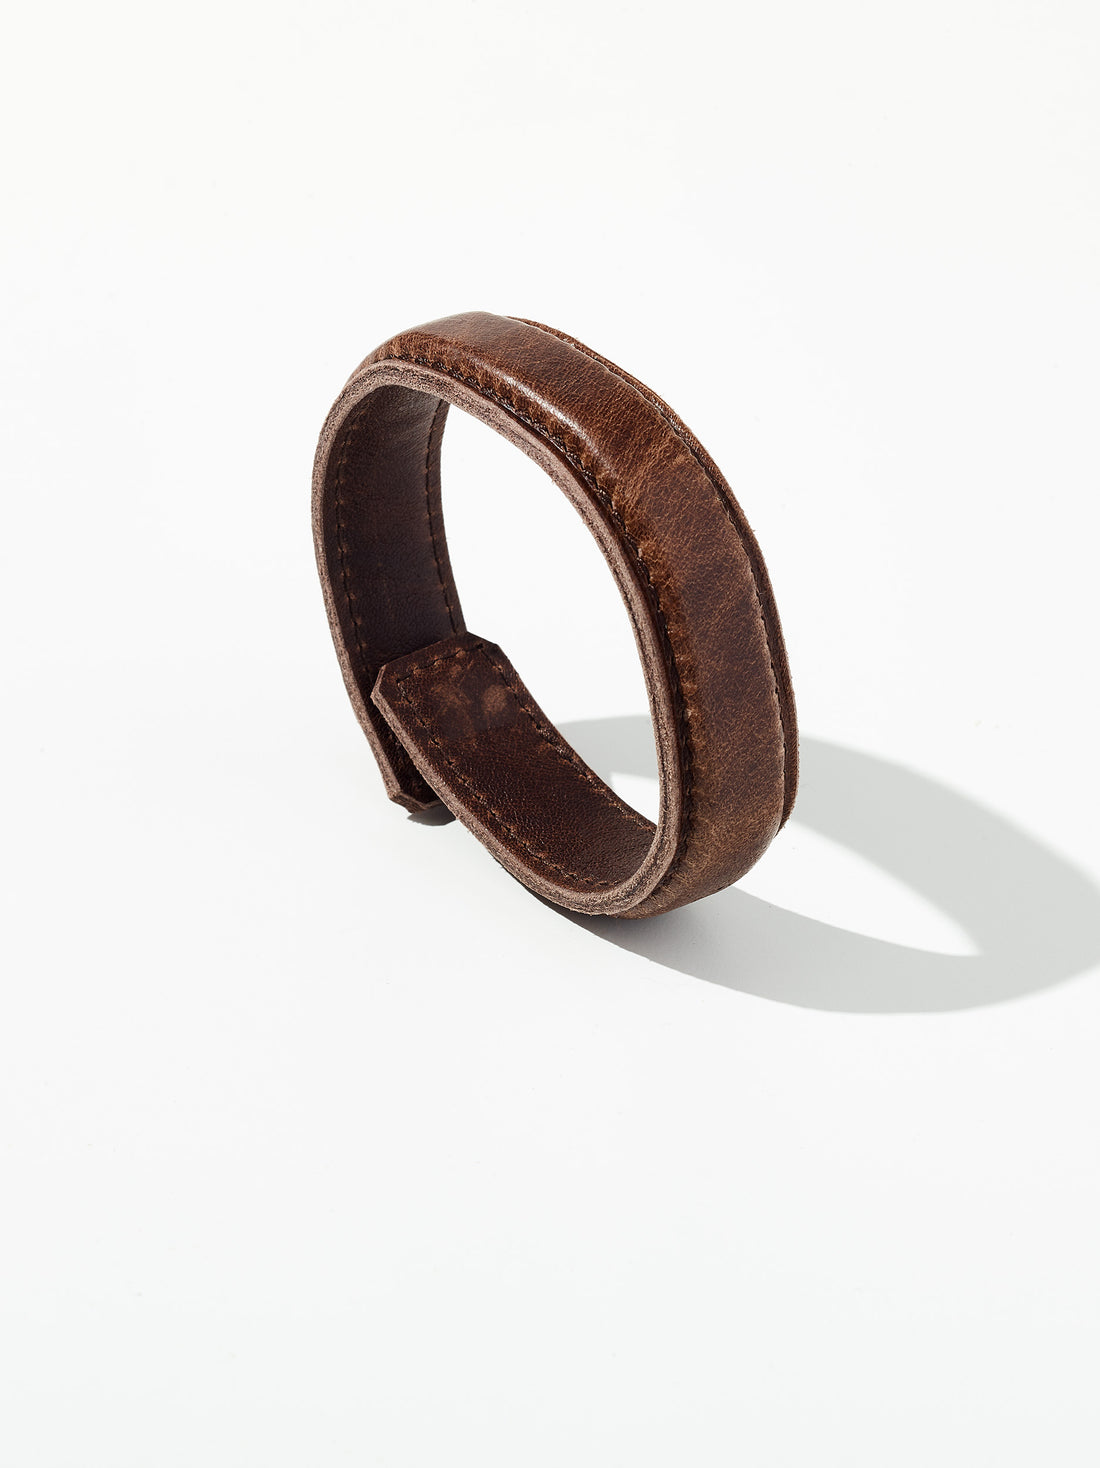 Hide & Hammer Magnetic Leather Cuff